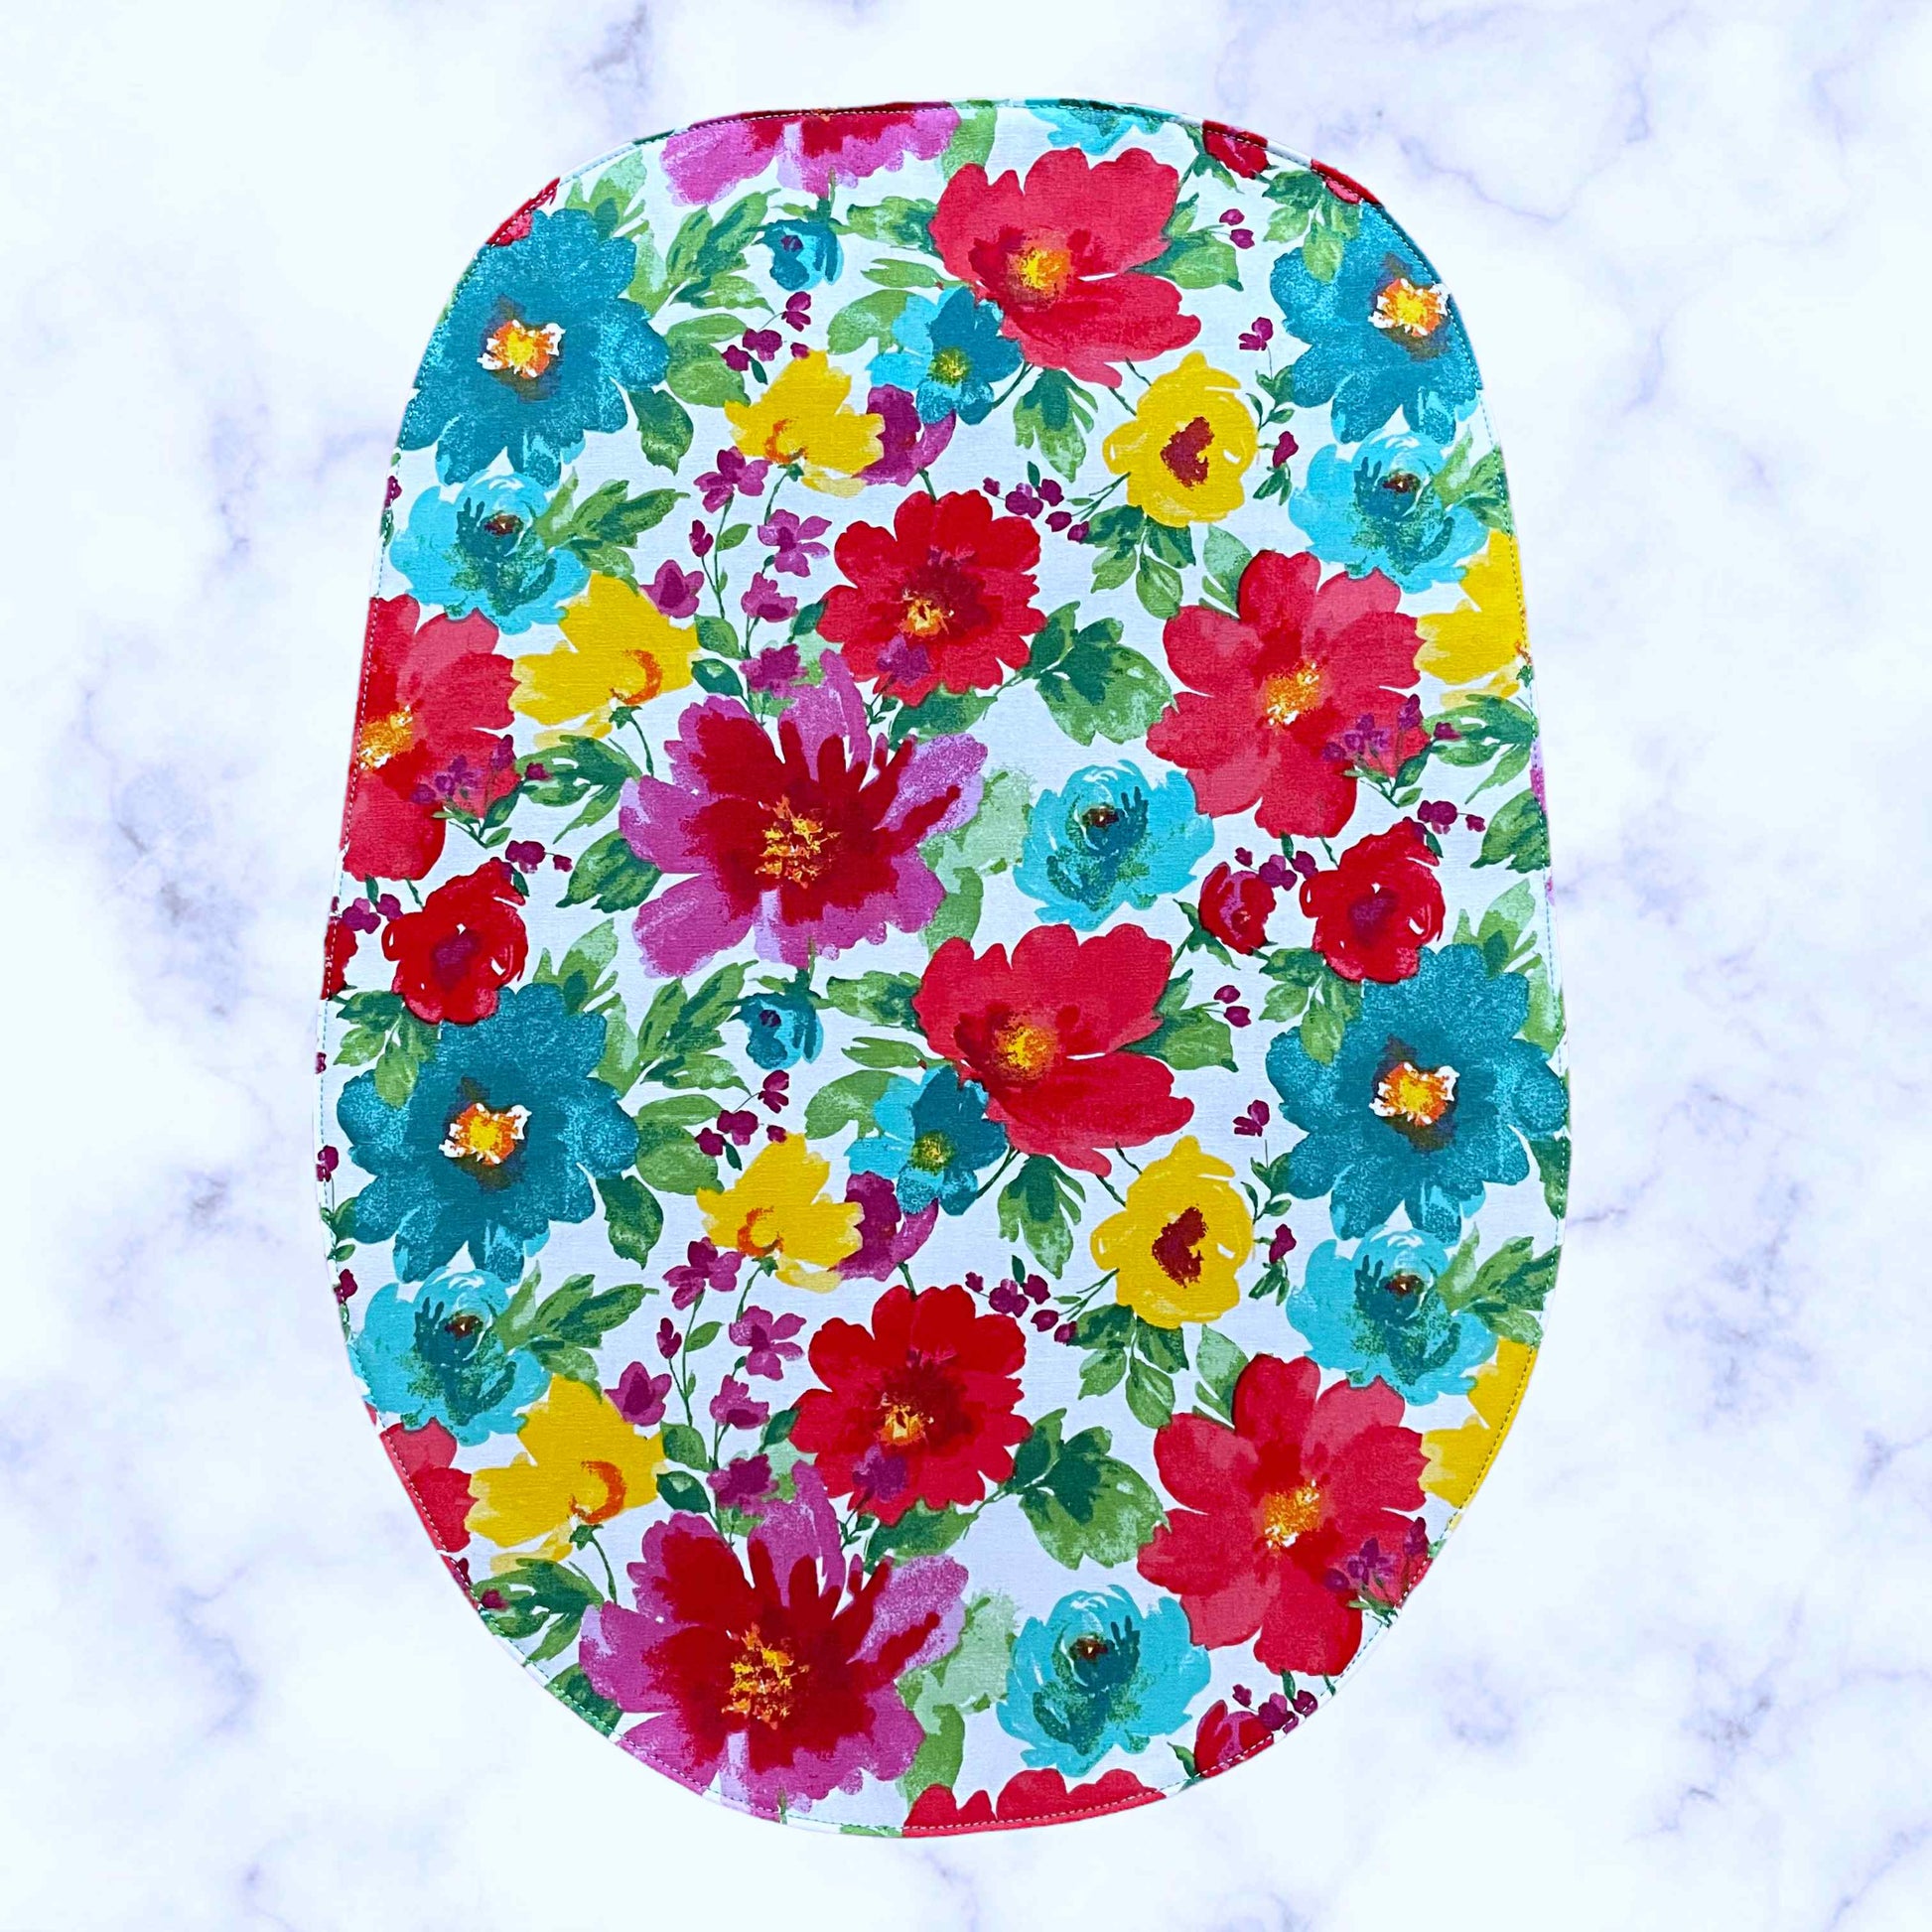 Stand Mixer Slider Mat - Pioneer Woman Sweet Rose Floral